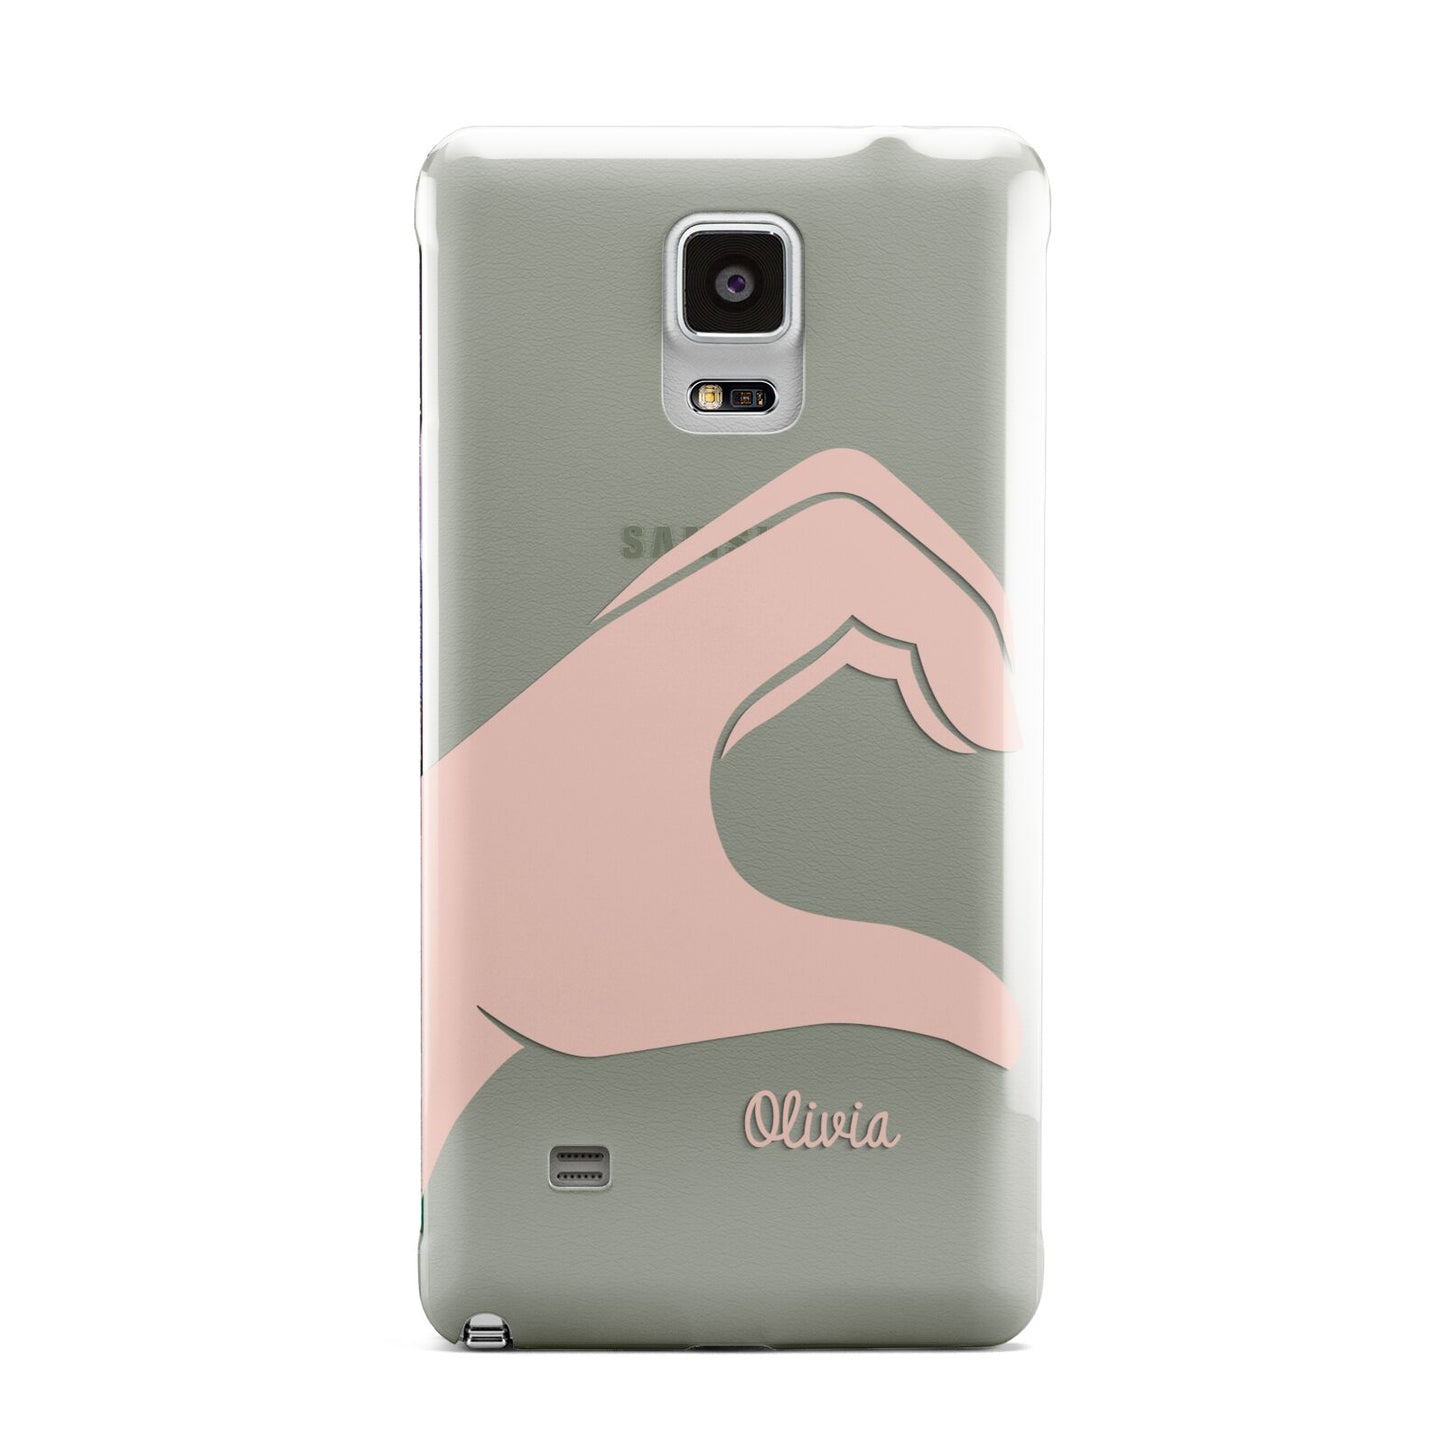 Left Hand in Half Heart with Name Samsung Galaxy Note 4 Case